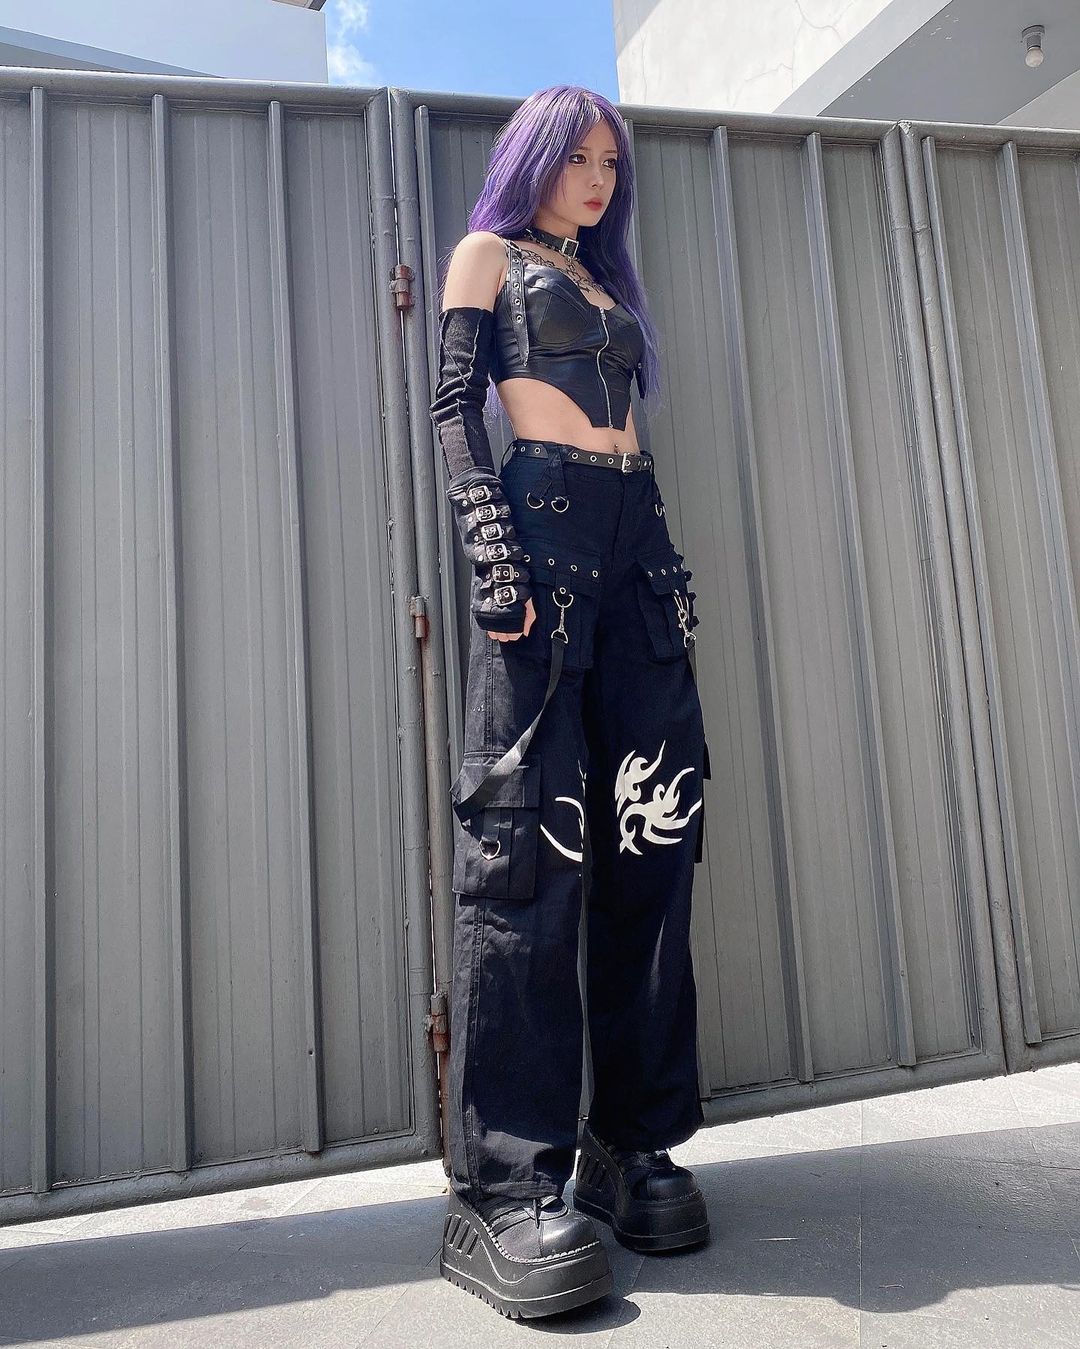 @losttcreature in the Tattoo Strappy Oversized Pants